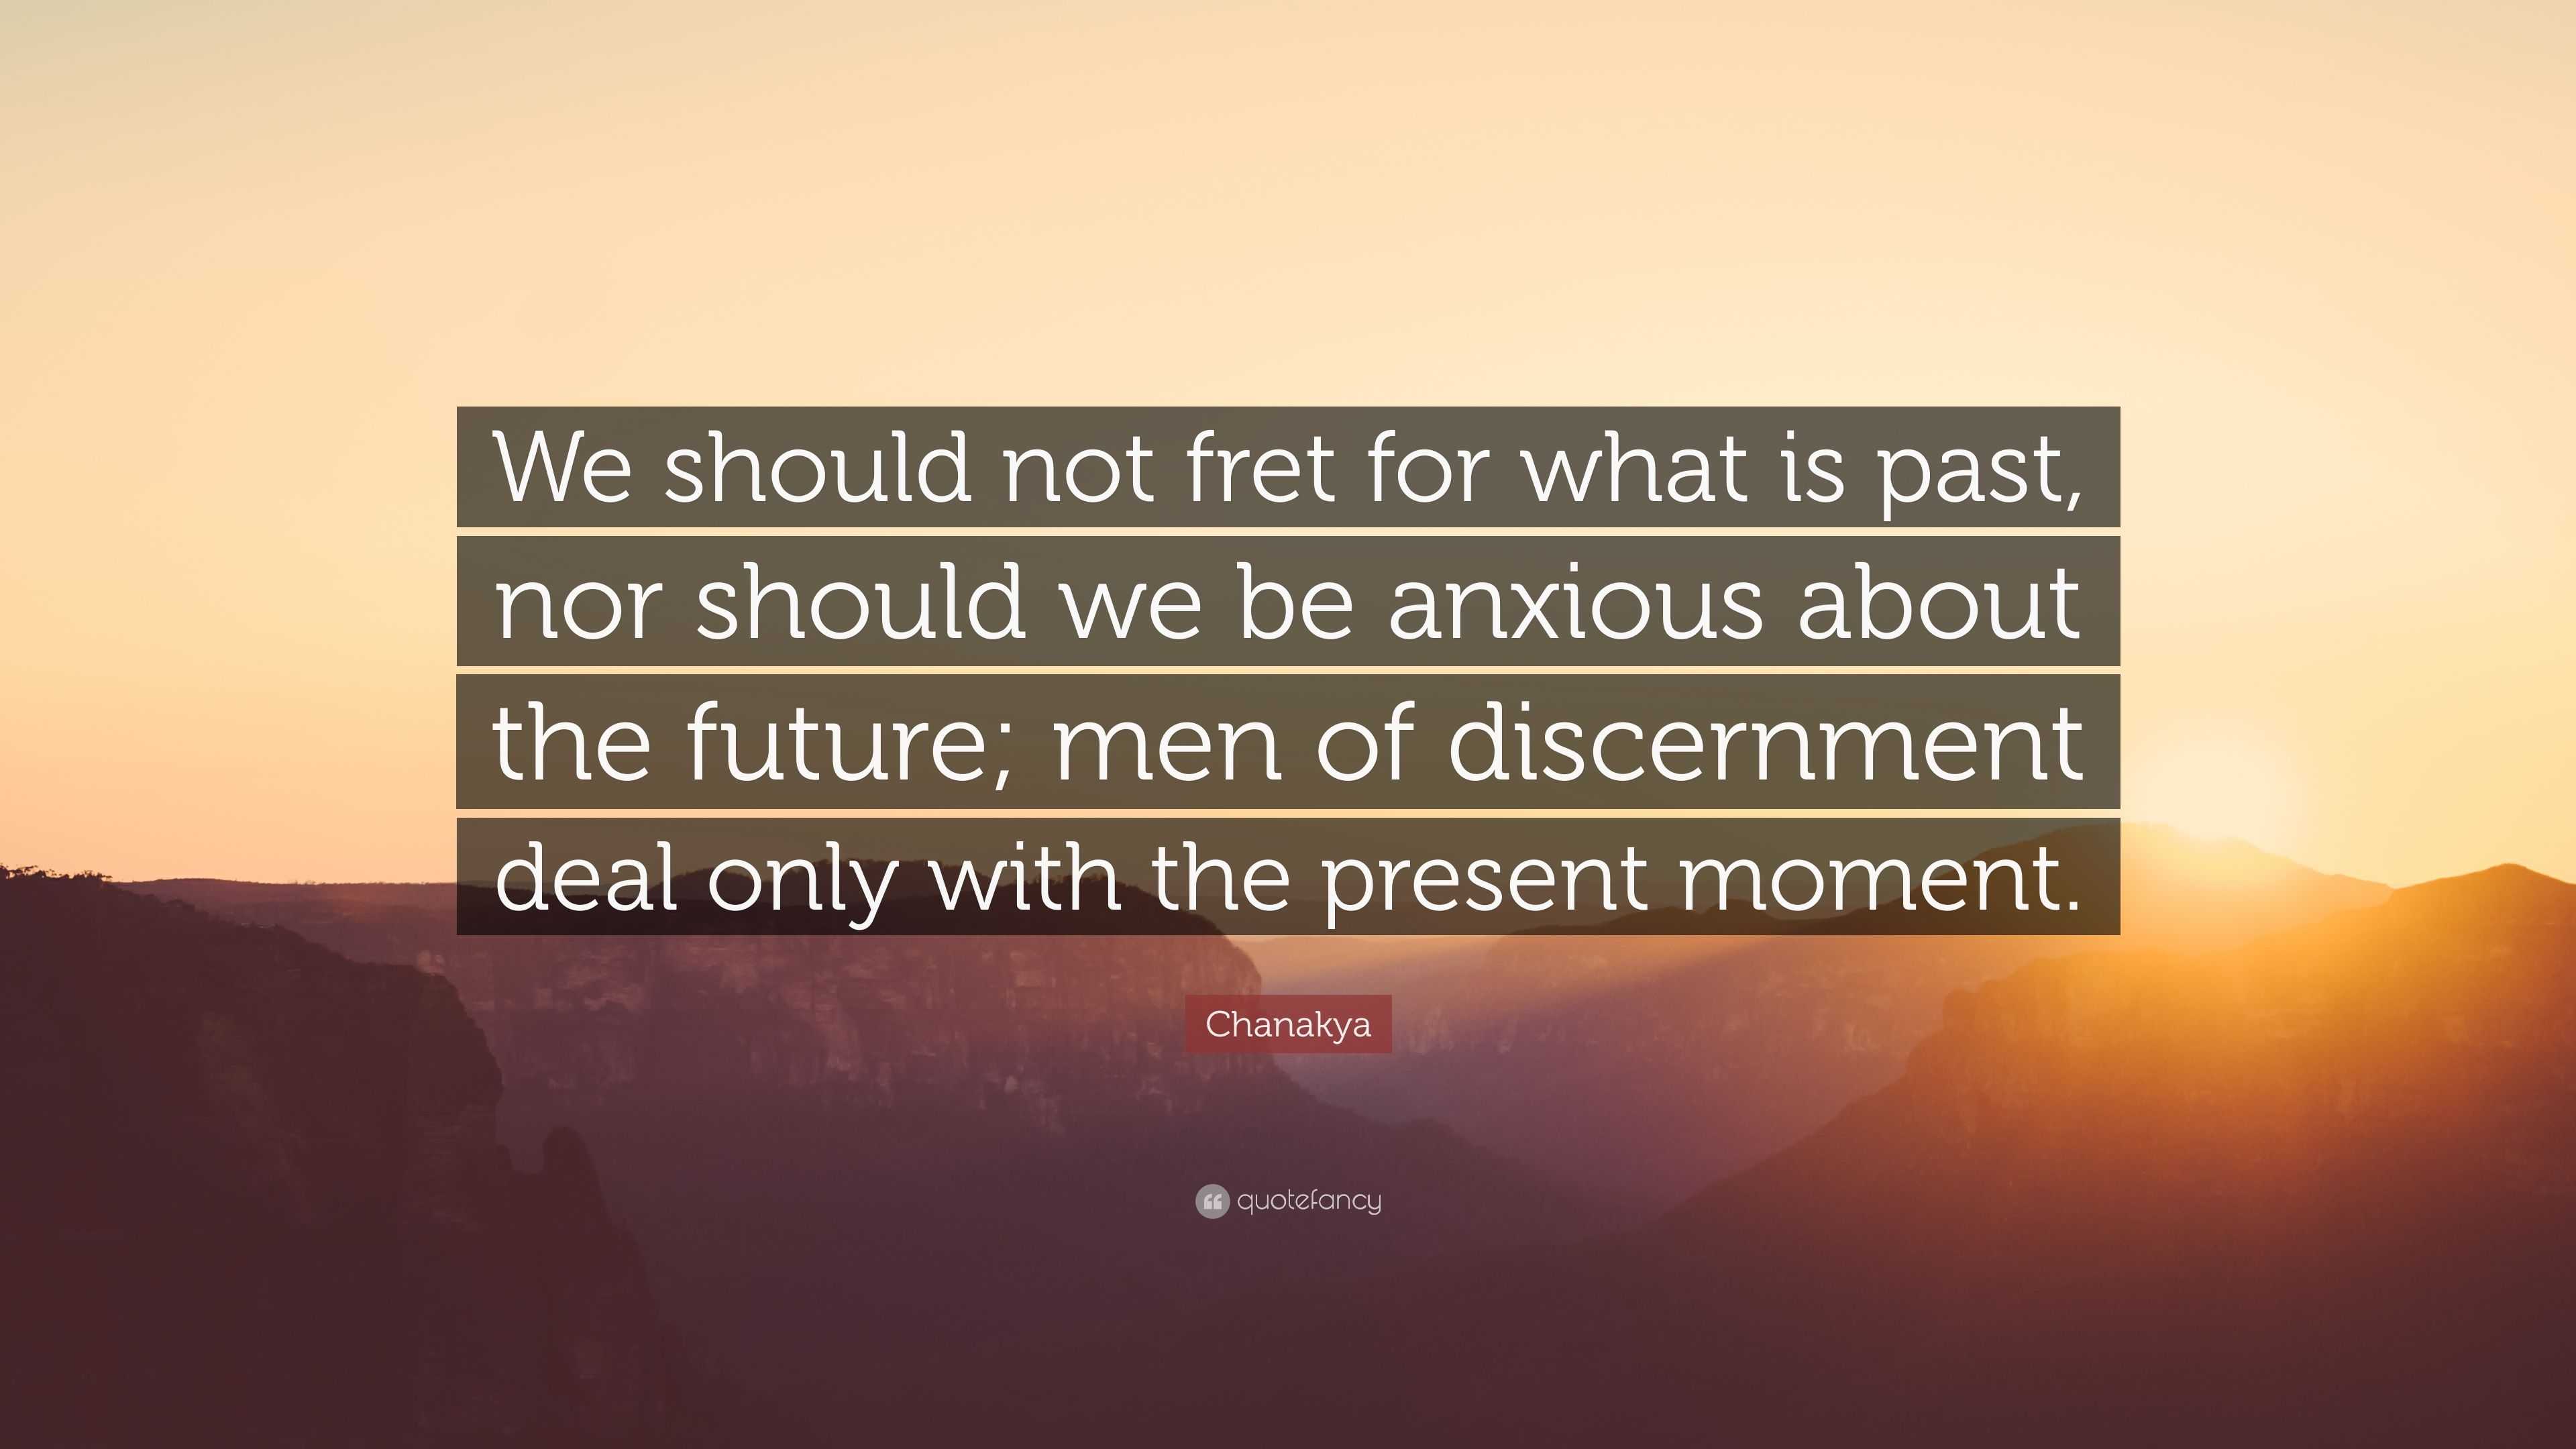 Chanakya Quote: “We should not fret for what is past, nor should we be ...